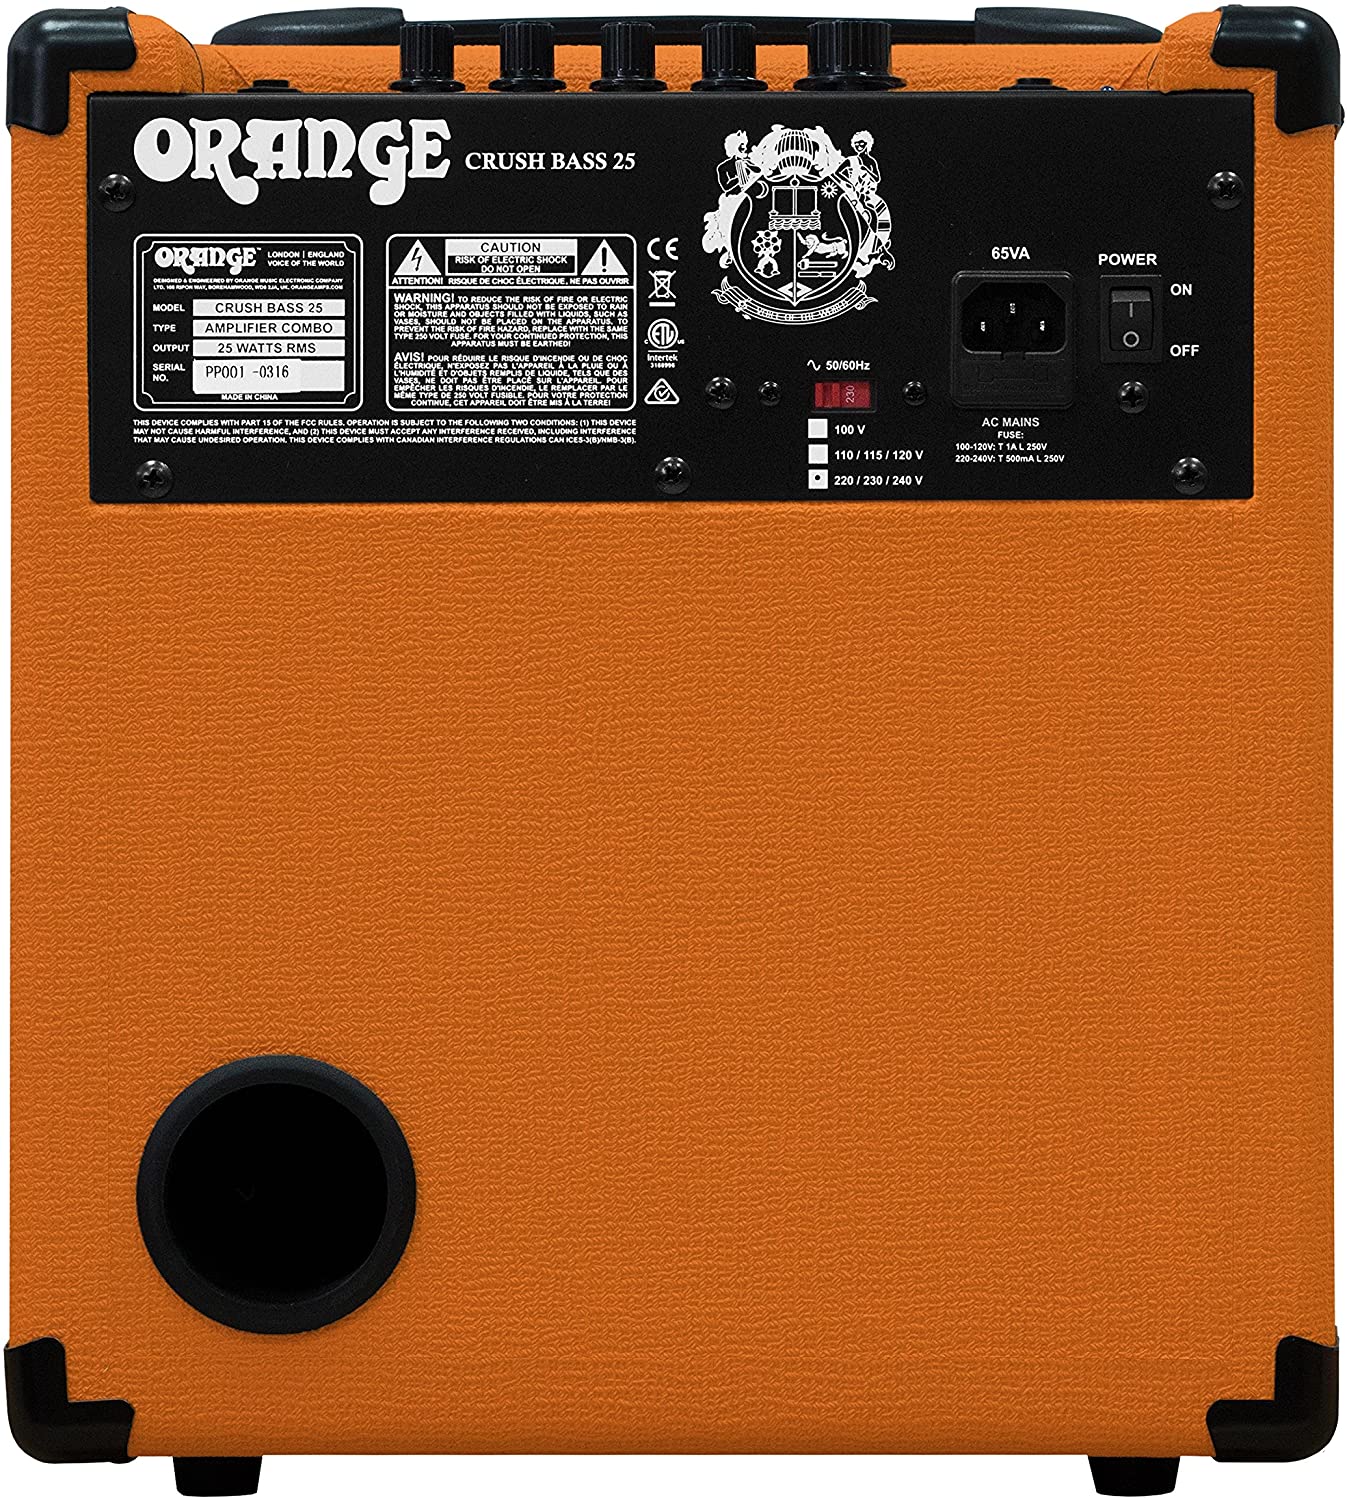 Orange Amps Crush Bass 25/50 Watt Combo Amplifier with Active 3 Band EQ, Parametric Mid Control & Chromatic Tuner for Electric Guitars